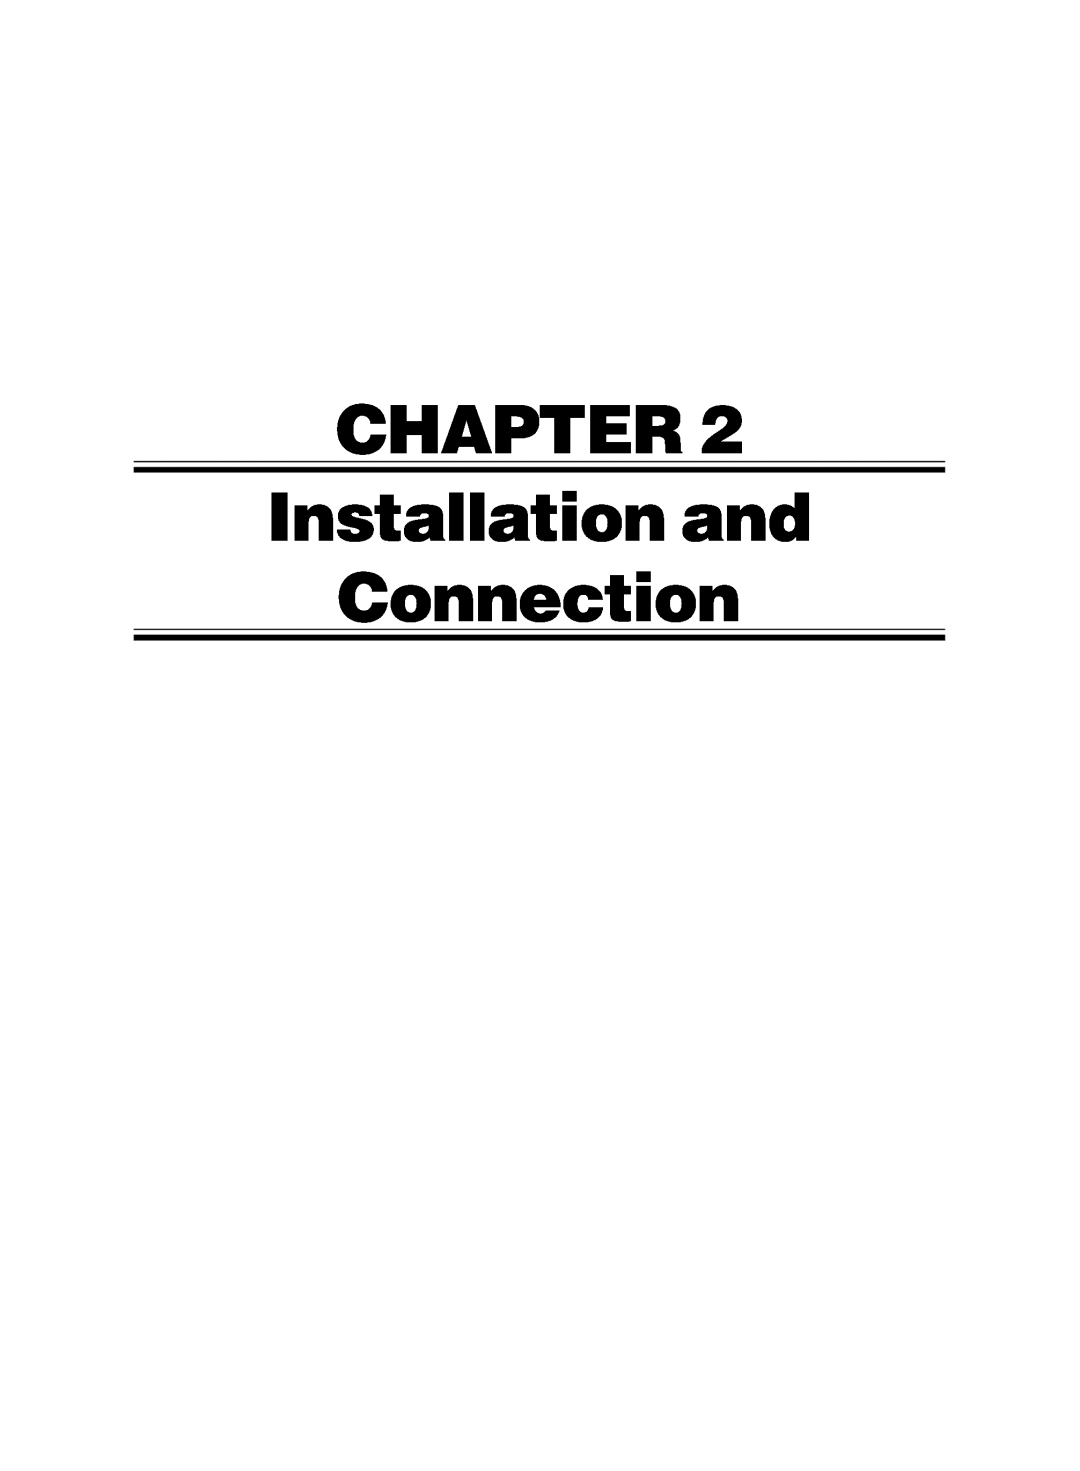 Fujitsu 5000 user manual Chapter, Installation and Connection 